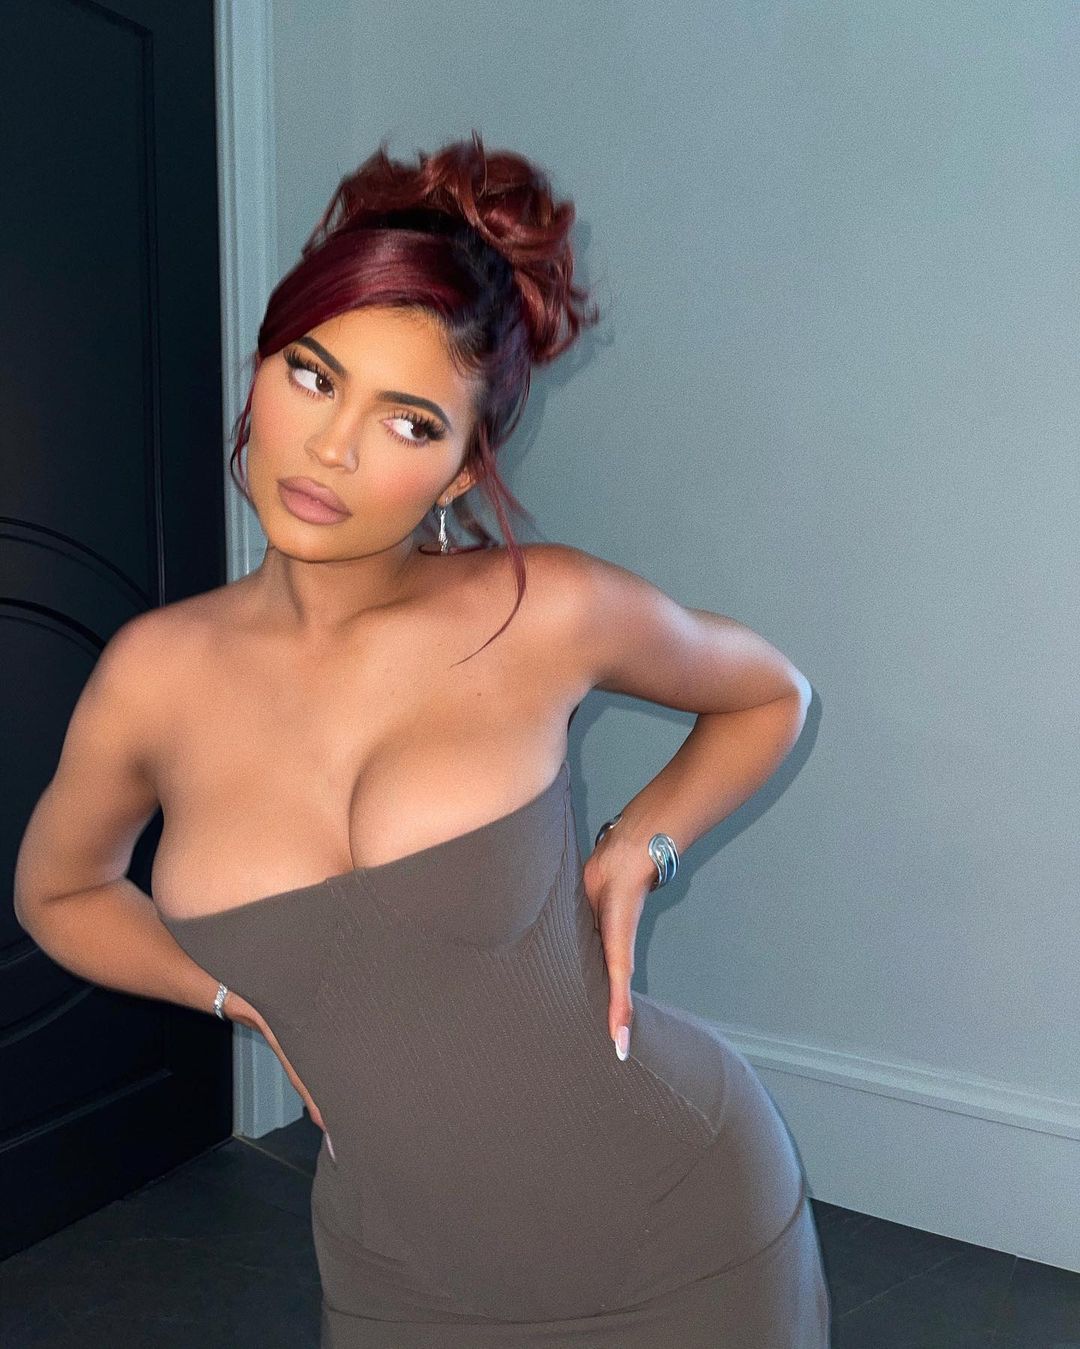 Kylie Jenner Shows Off Her Curves In These Hσт Pictures